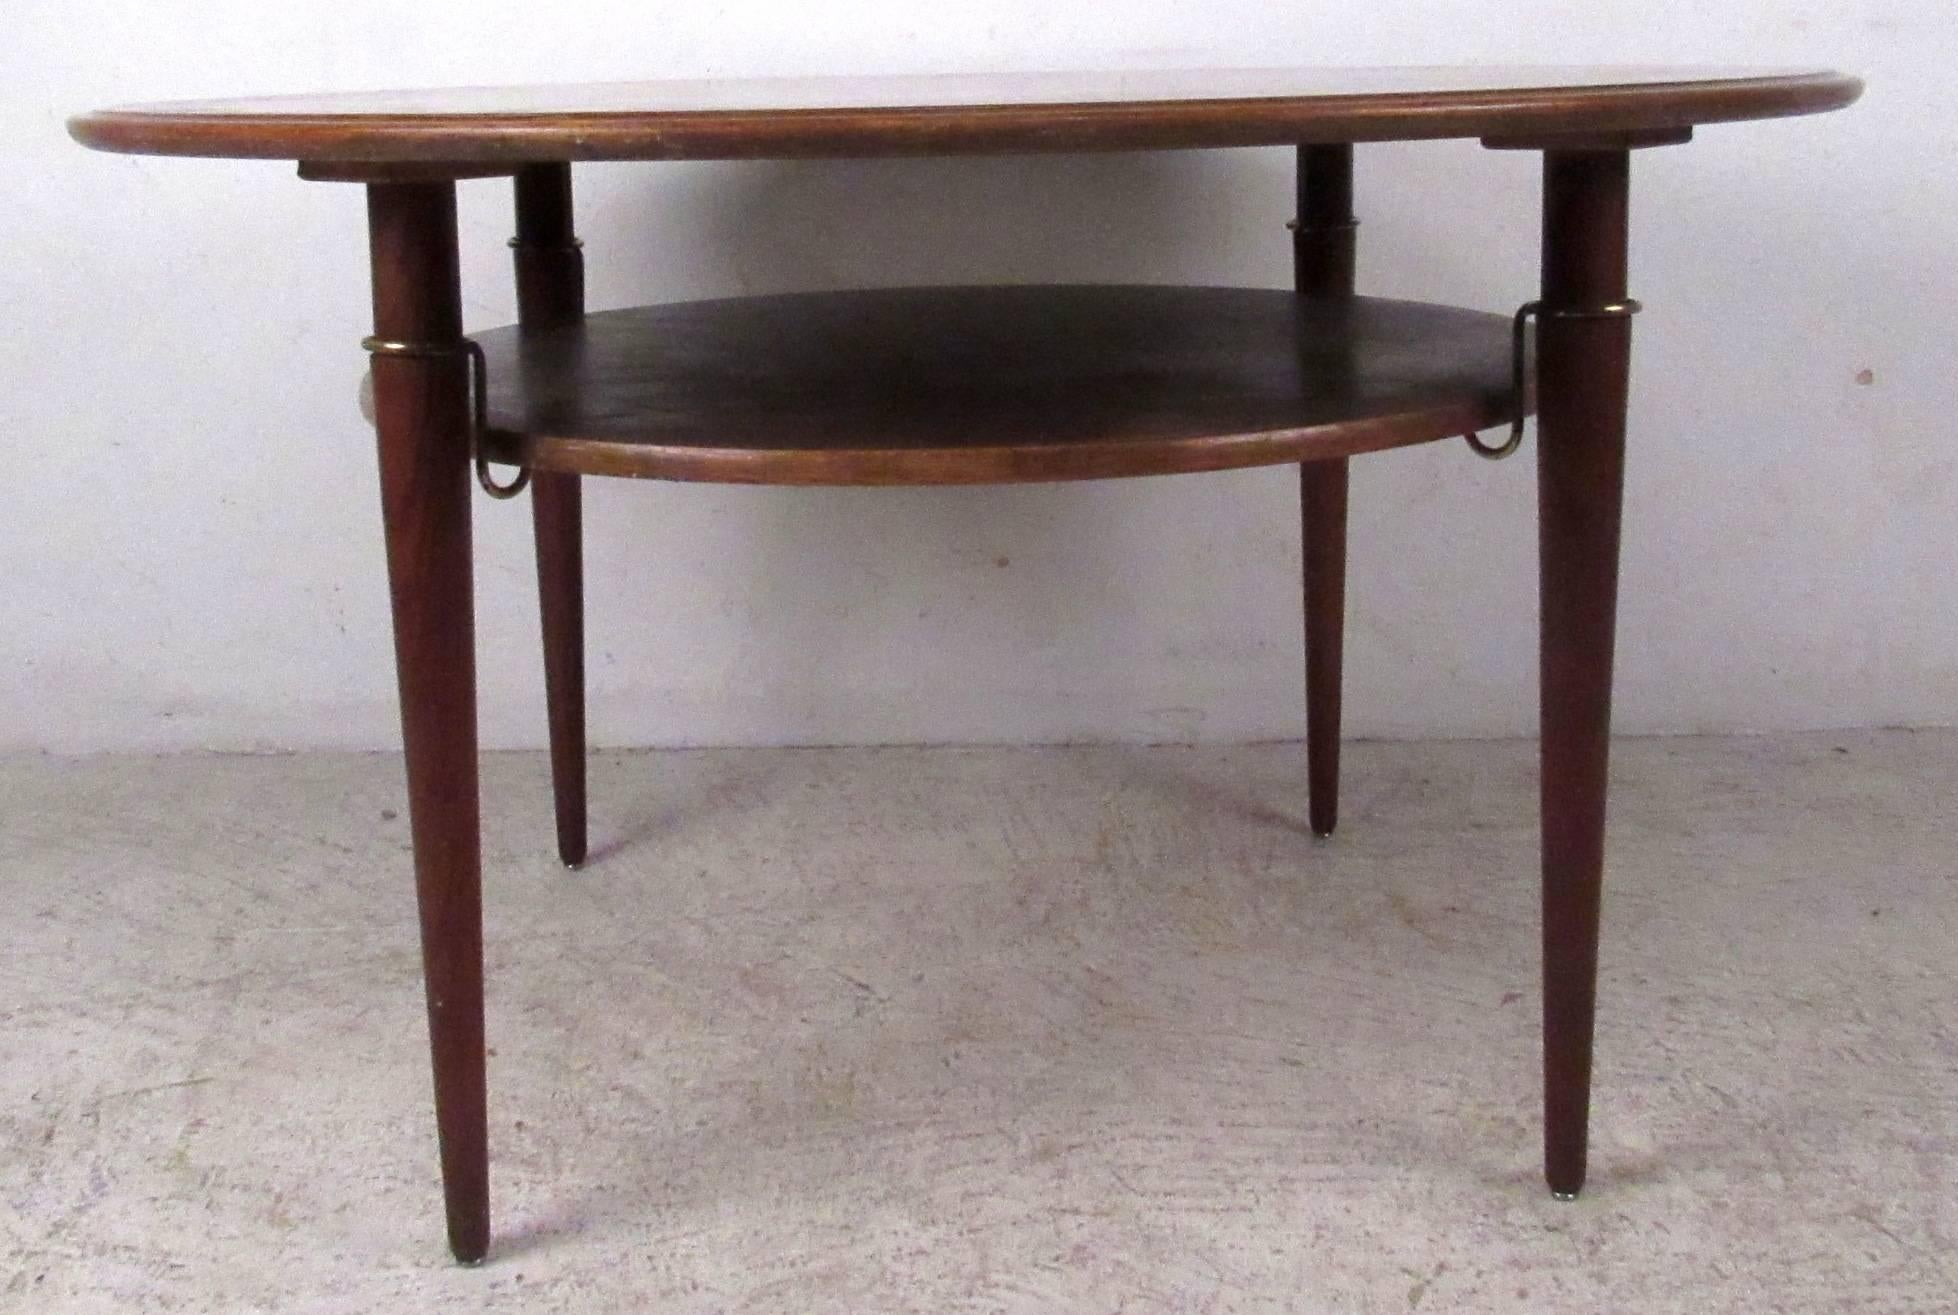 Vintage modern cocktail table featuring beautifully sculpted base with lower shelf and round top. (Matching sofa and chairs sold separately, see pictures).

Please confirm item location NY or NJ with dealer.